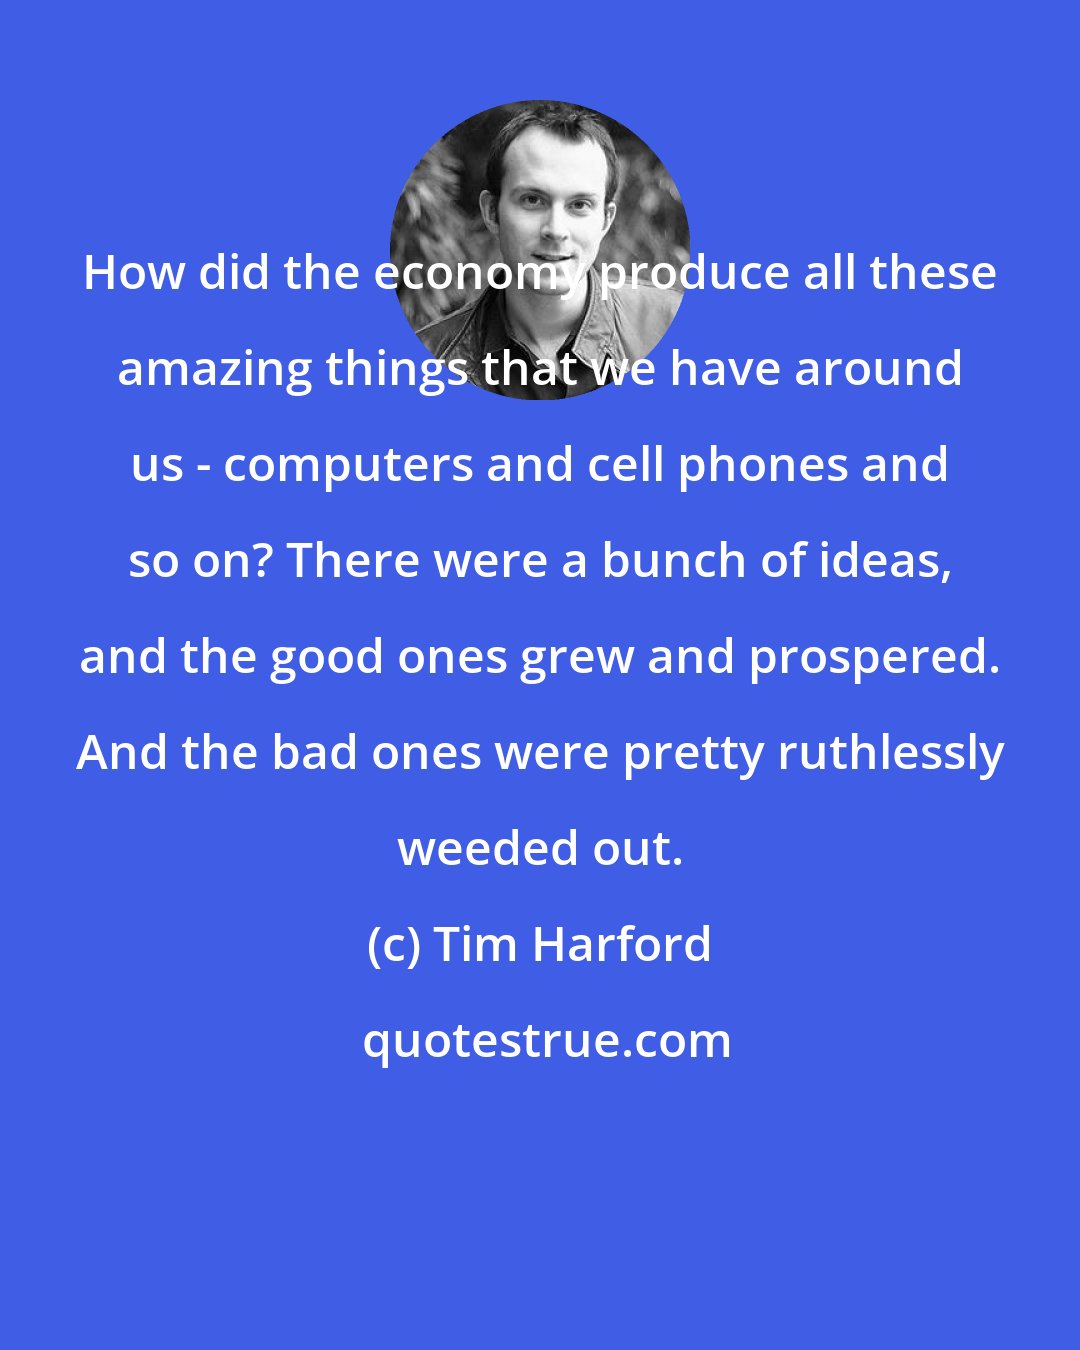 Tim Harford: How did the economy produce all these amazing things that we have around us - computers and cell phones and so on? There were a bunch of ideas, and the good ones grew and prospered. And the bad ones were pretty ruthlessly weeded out.